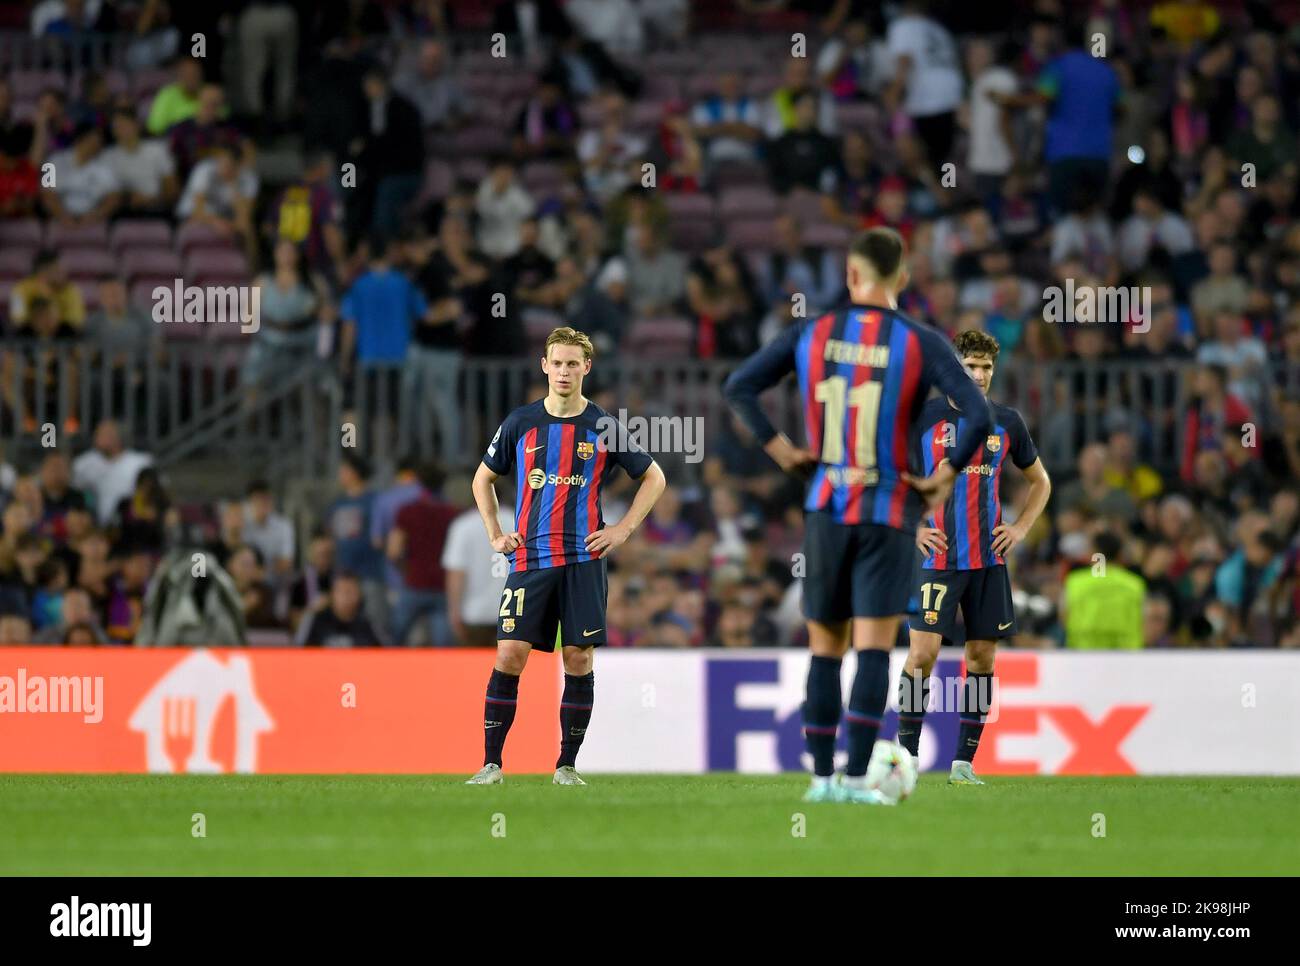 FC BARCELONA vs BAYERN MÜNCHEN October 26,2022  Frenkie de Jong (21) of FC Barcelona reacts  during the match between FC Barcelona and Bayern Munich corresponding to the the group stage of the UEFA Champions League at Spotify Camp Nou Stadium in Barcelona, Spain. October 26, 2022. Stock Photo